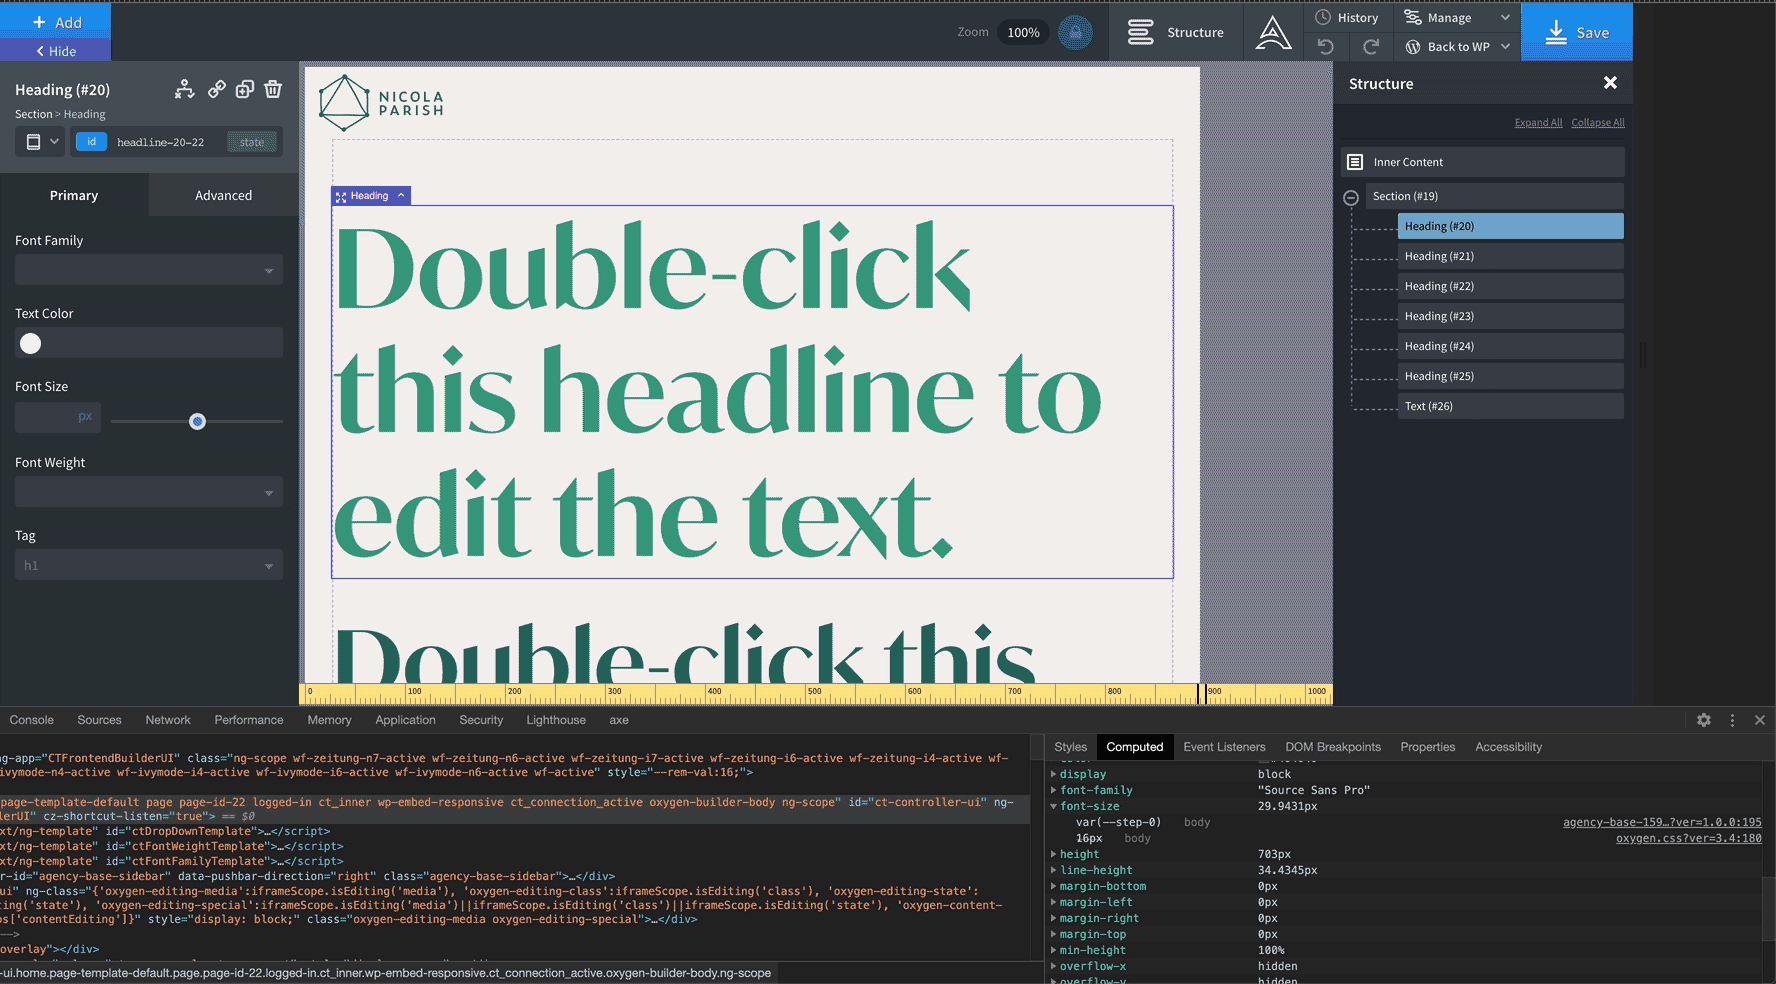 Fluid fonts when MT is active but not in use